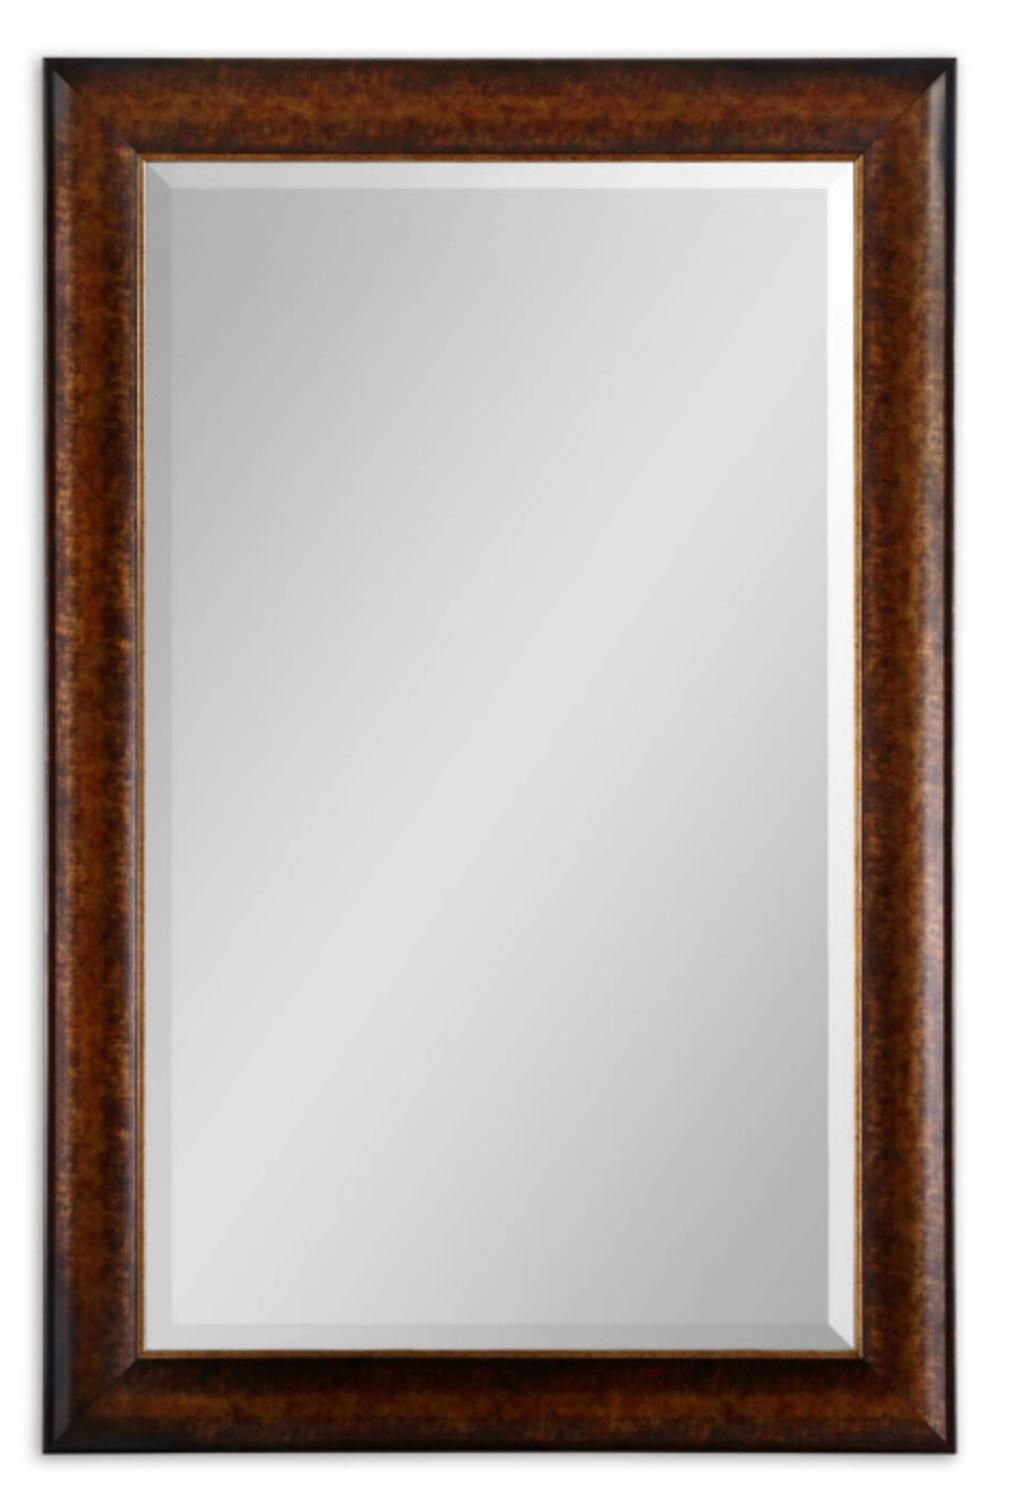 58" Rustic Bronze With Silver Tones Framed Beveled Rectangular Wall Intended For Silver Beveled Wall Mirrors (View 11 of 15)